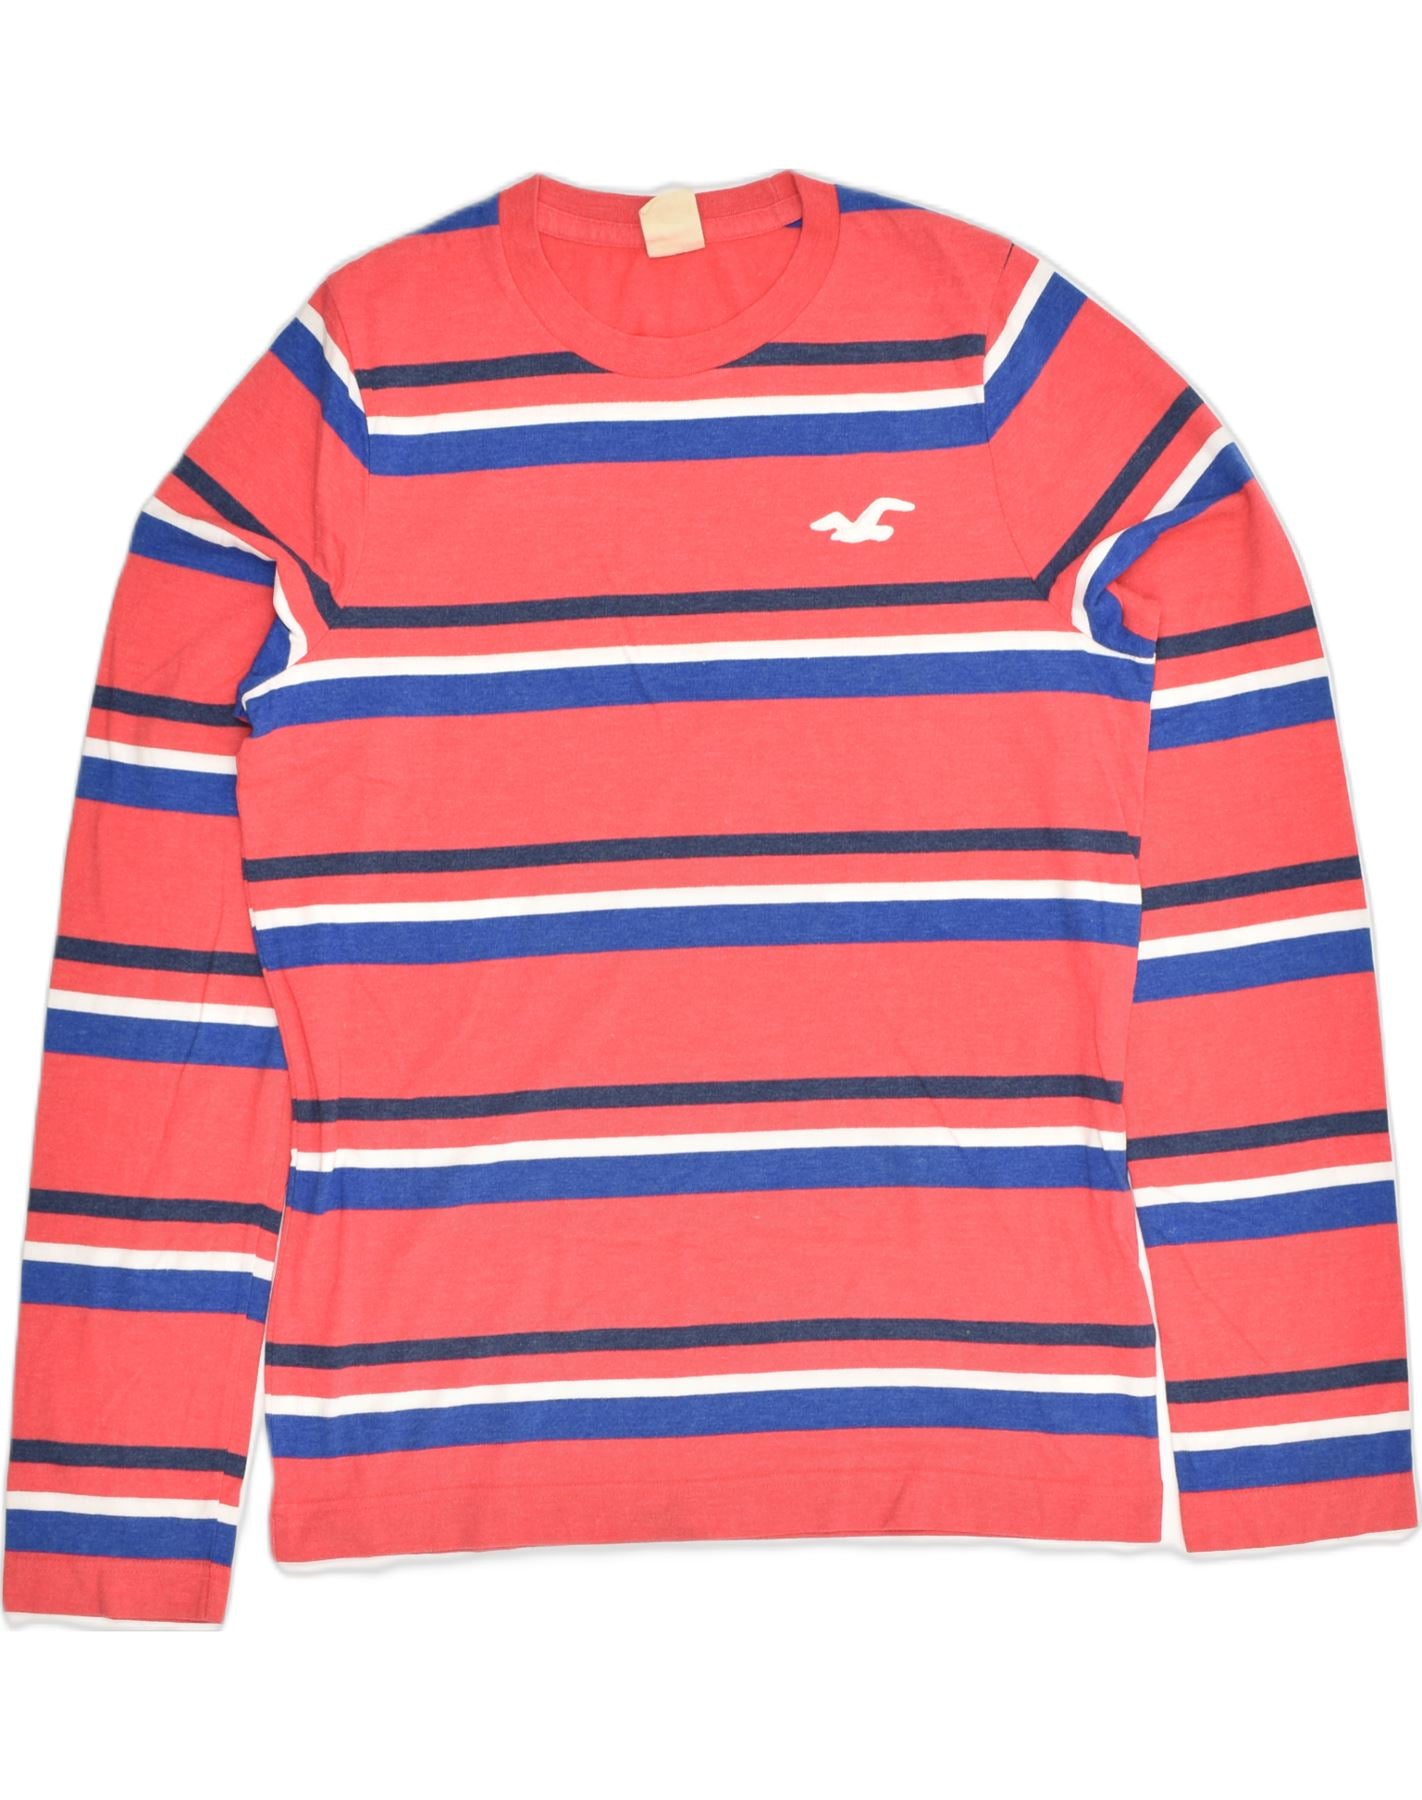 HOLLISTER Mens Top Long Sleeve XL Red Striped Cotton